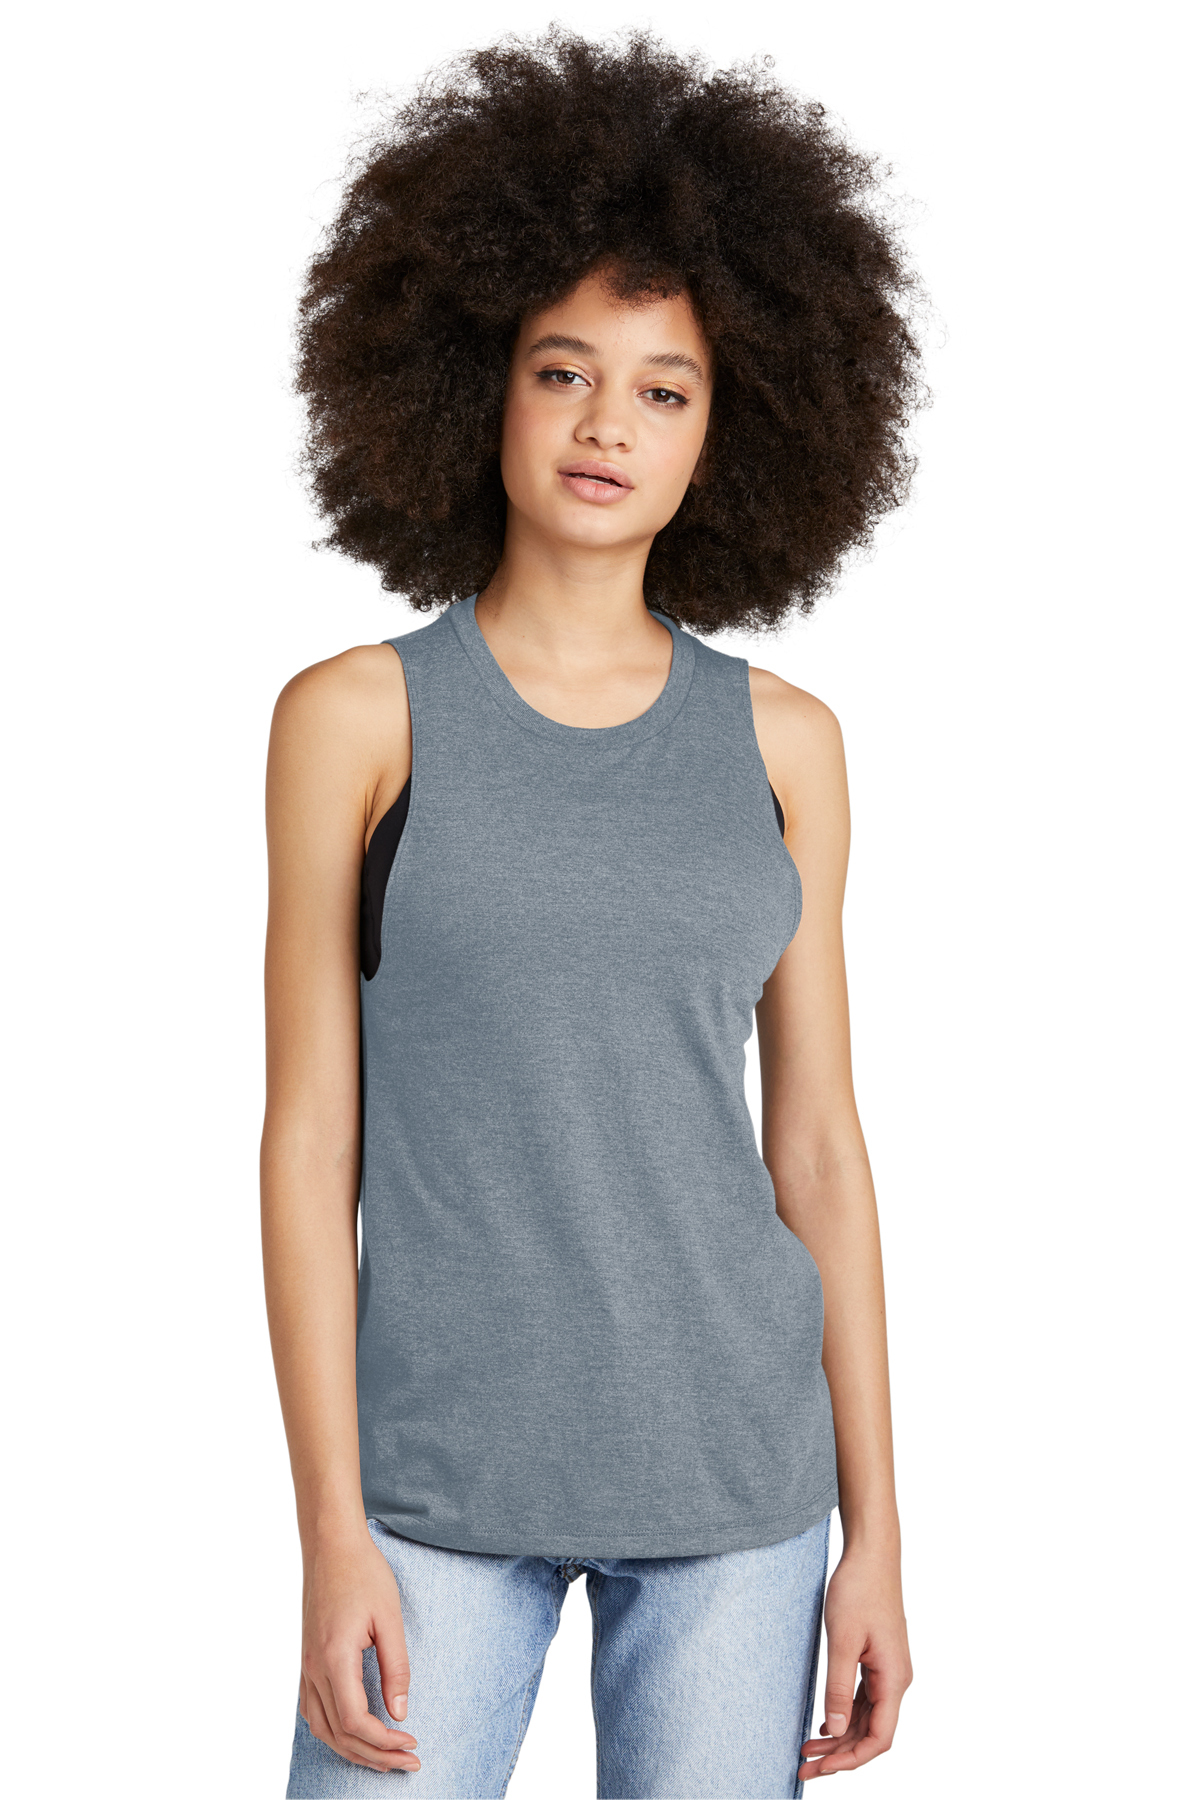 Muscle Tanks, Muscle Tees for Women